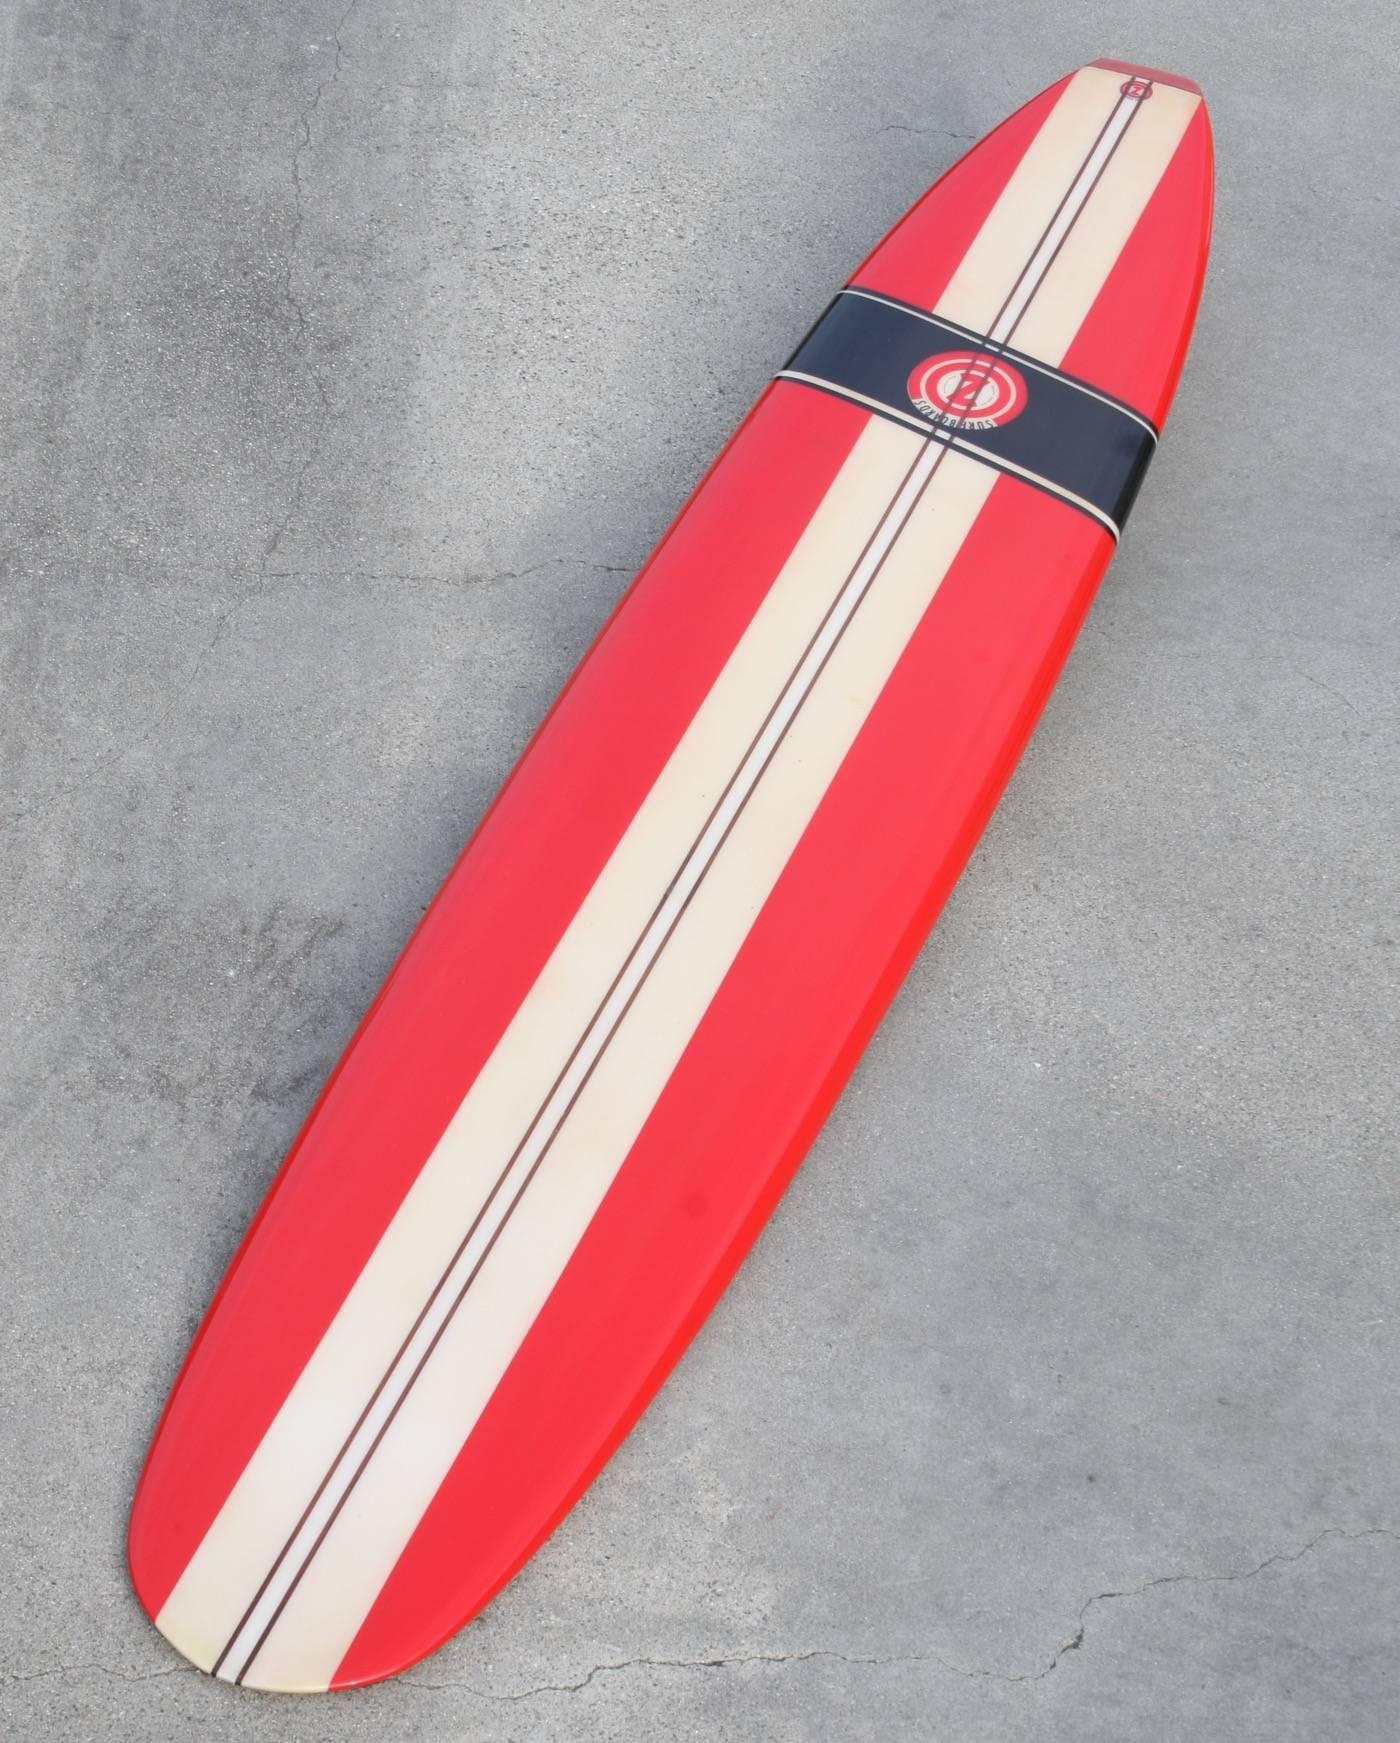 Mid-Century Modern 1960s Surfboard by CON, Santa Monica California, 1960s, Fully Restored For Sale